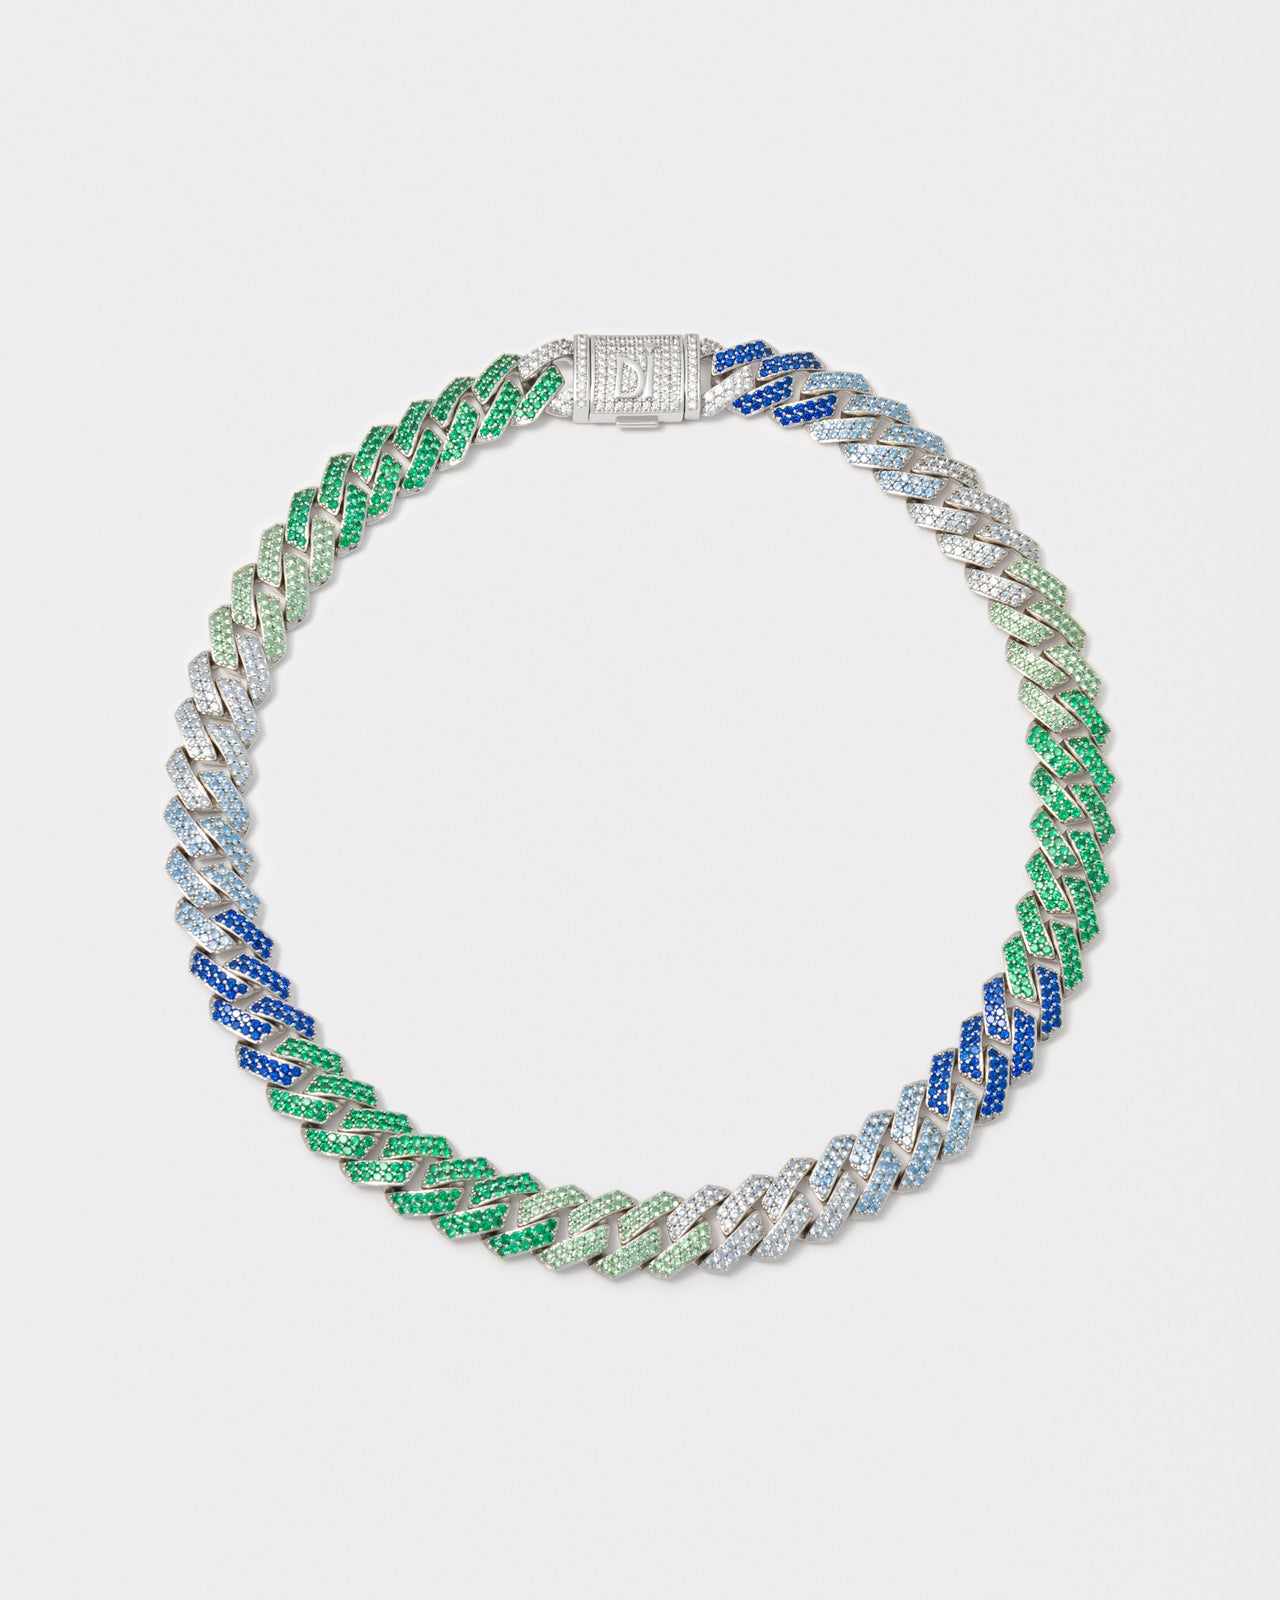 18k white gold coated prong chain necklace with hand-set micropavé stones in gradient white, brazil green, green, aquamarine, tanzanite and sapphire blue